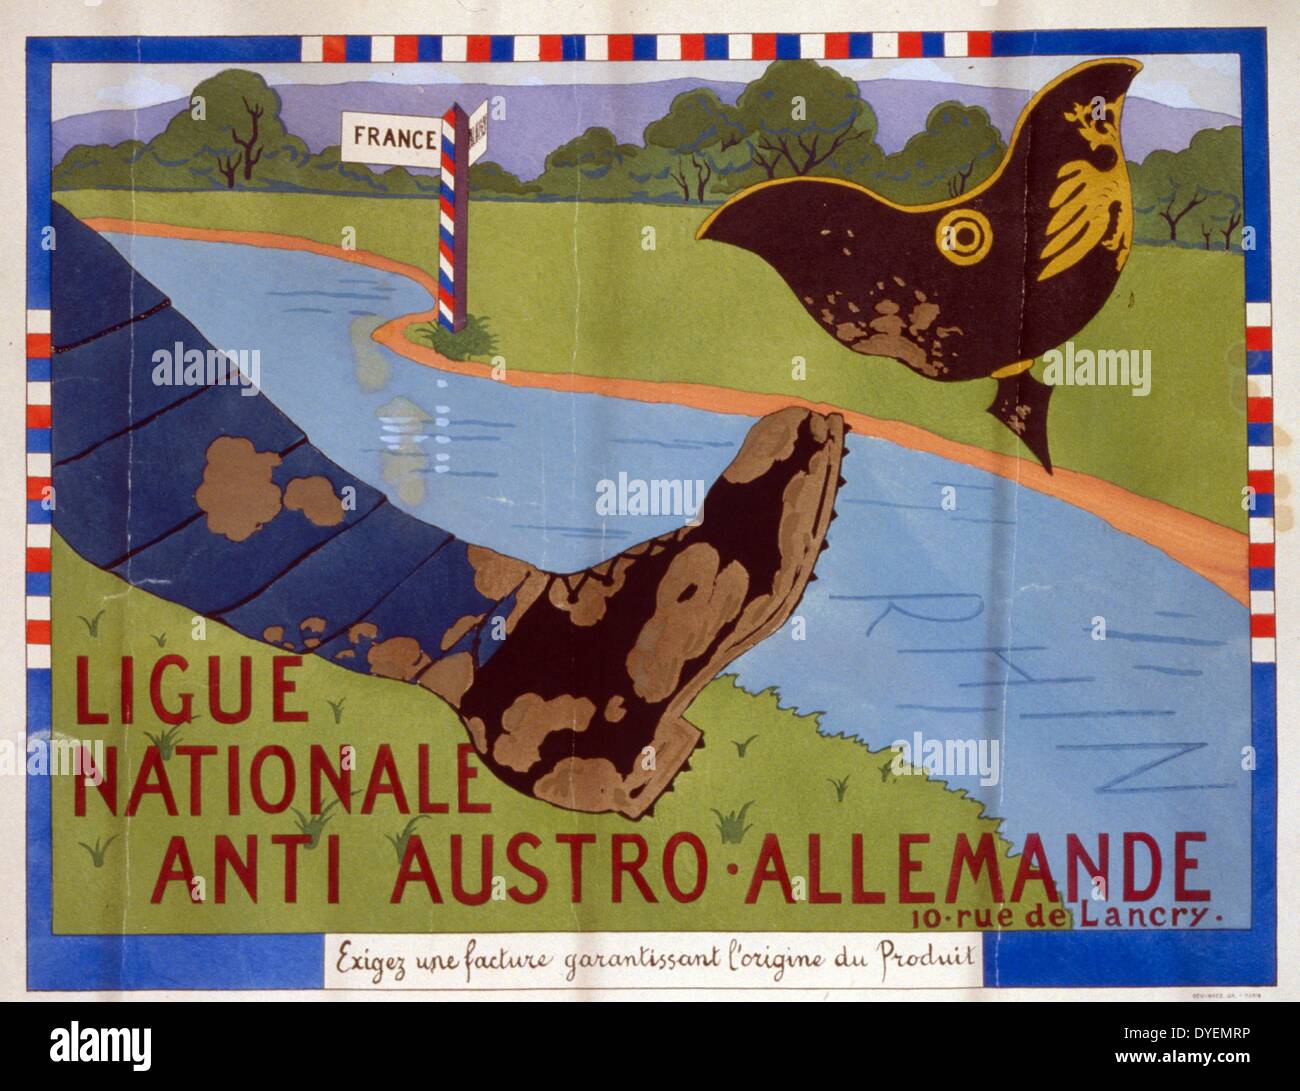 Ligue Nationale anti Austro-Allemande: Exigez une facture garantissant l'origine du produit. Translation of title: National League against the Austrians and Germans. Demand a bill of sale guaranteeing the origin of a product. 1920. A muddy French boot is kicking a German helmet over the Rhine river. Stock Photo